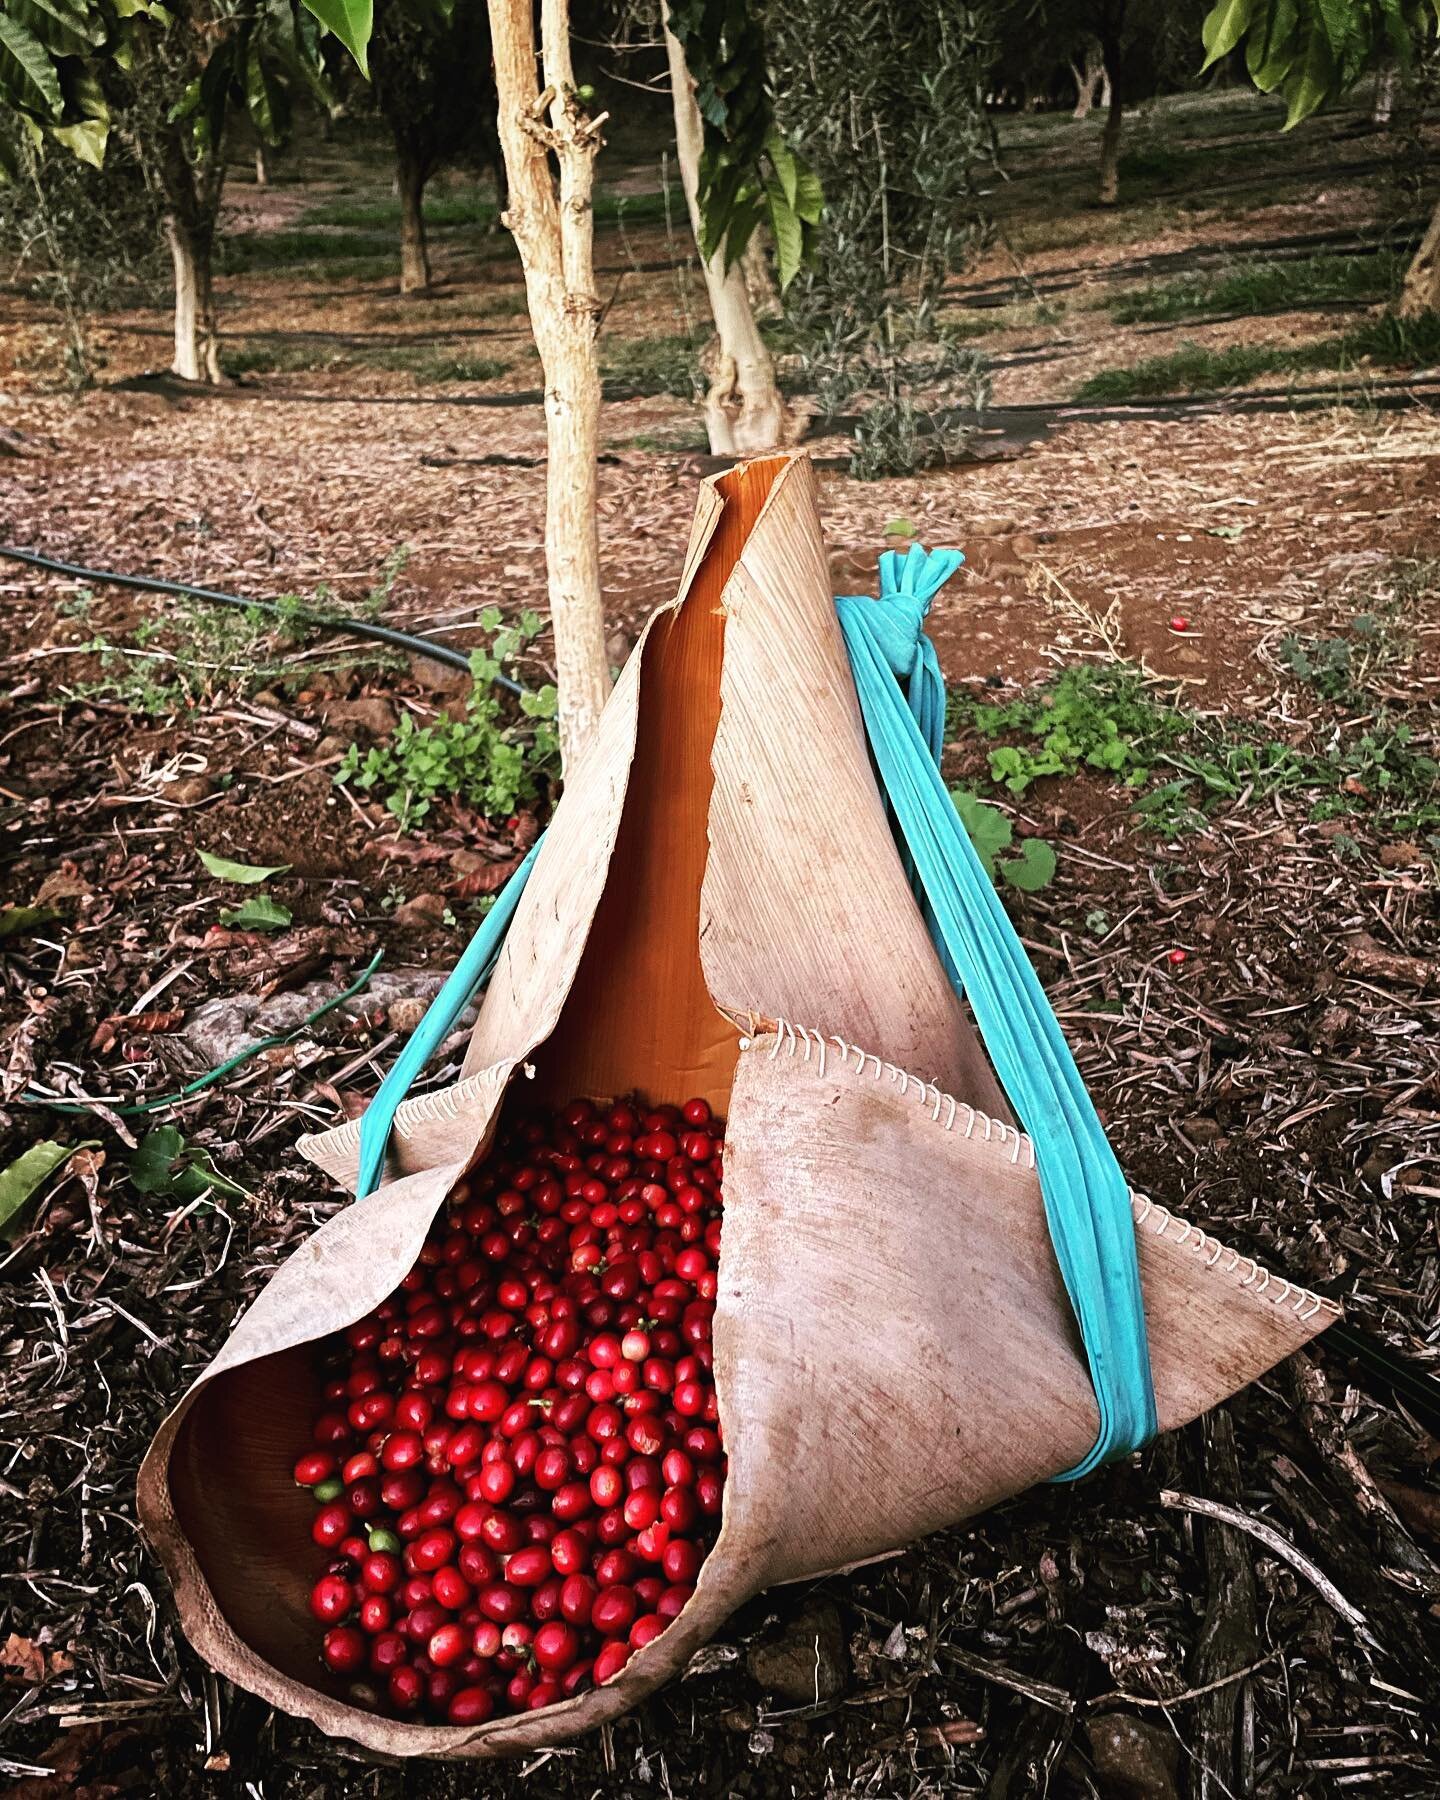 It&rsquo;s still a small coffee operation but we love sharing what we can&mdash;✋🤚hand picking the reds on our growing trees throughout the months and processing through our hands and those from our community! Mahalo @kupaafarms and @mauicoffeeroast